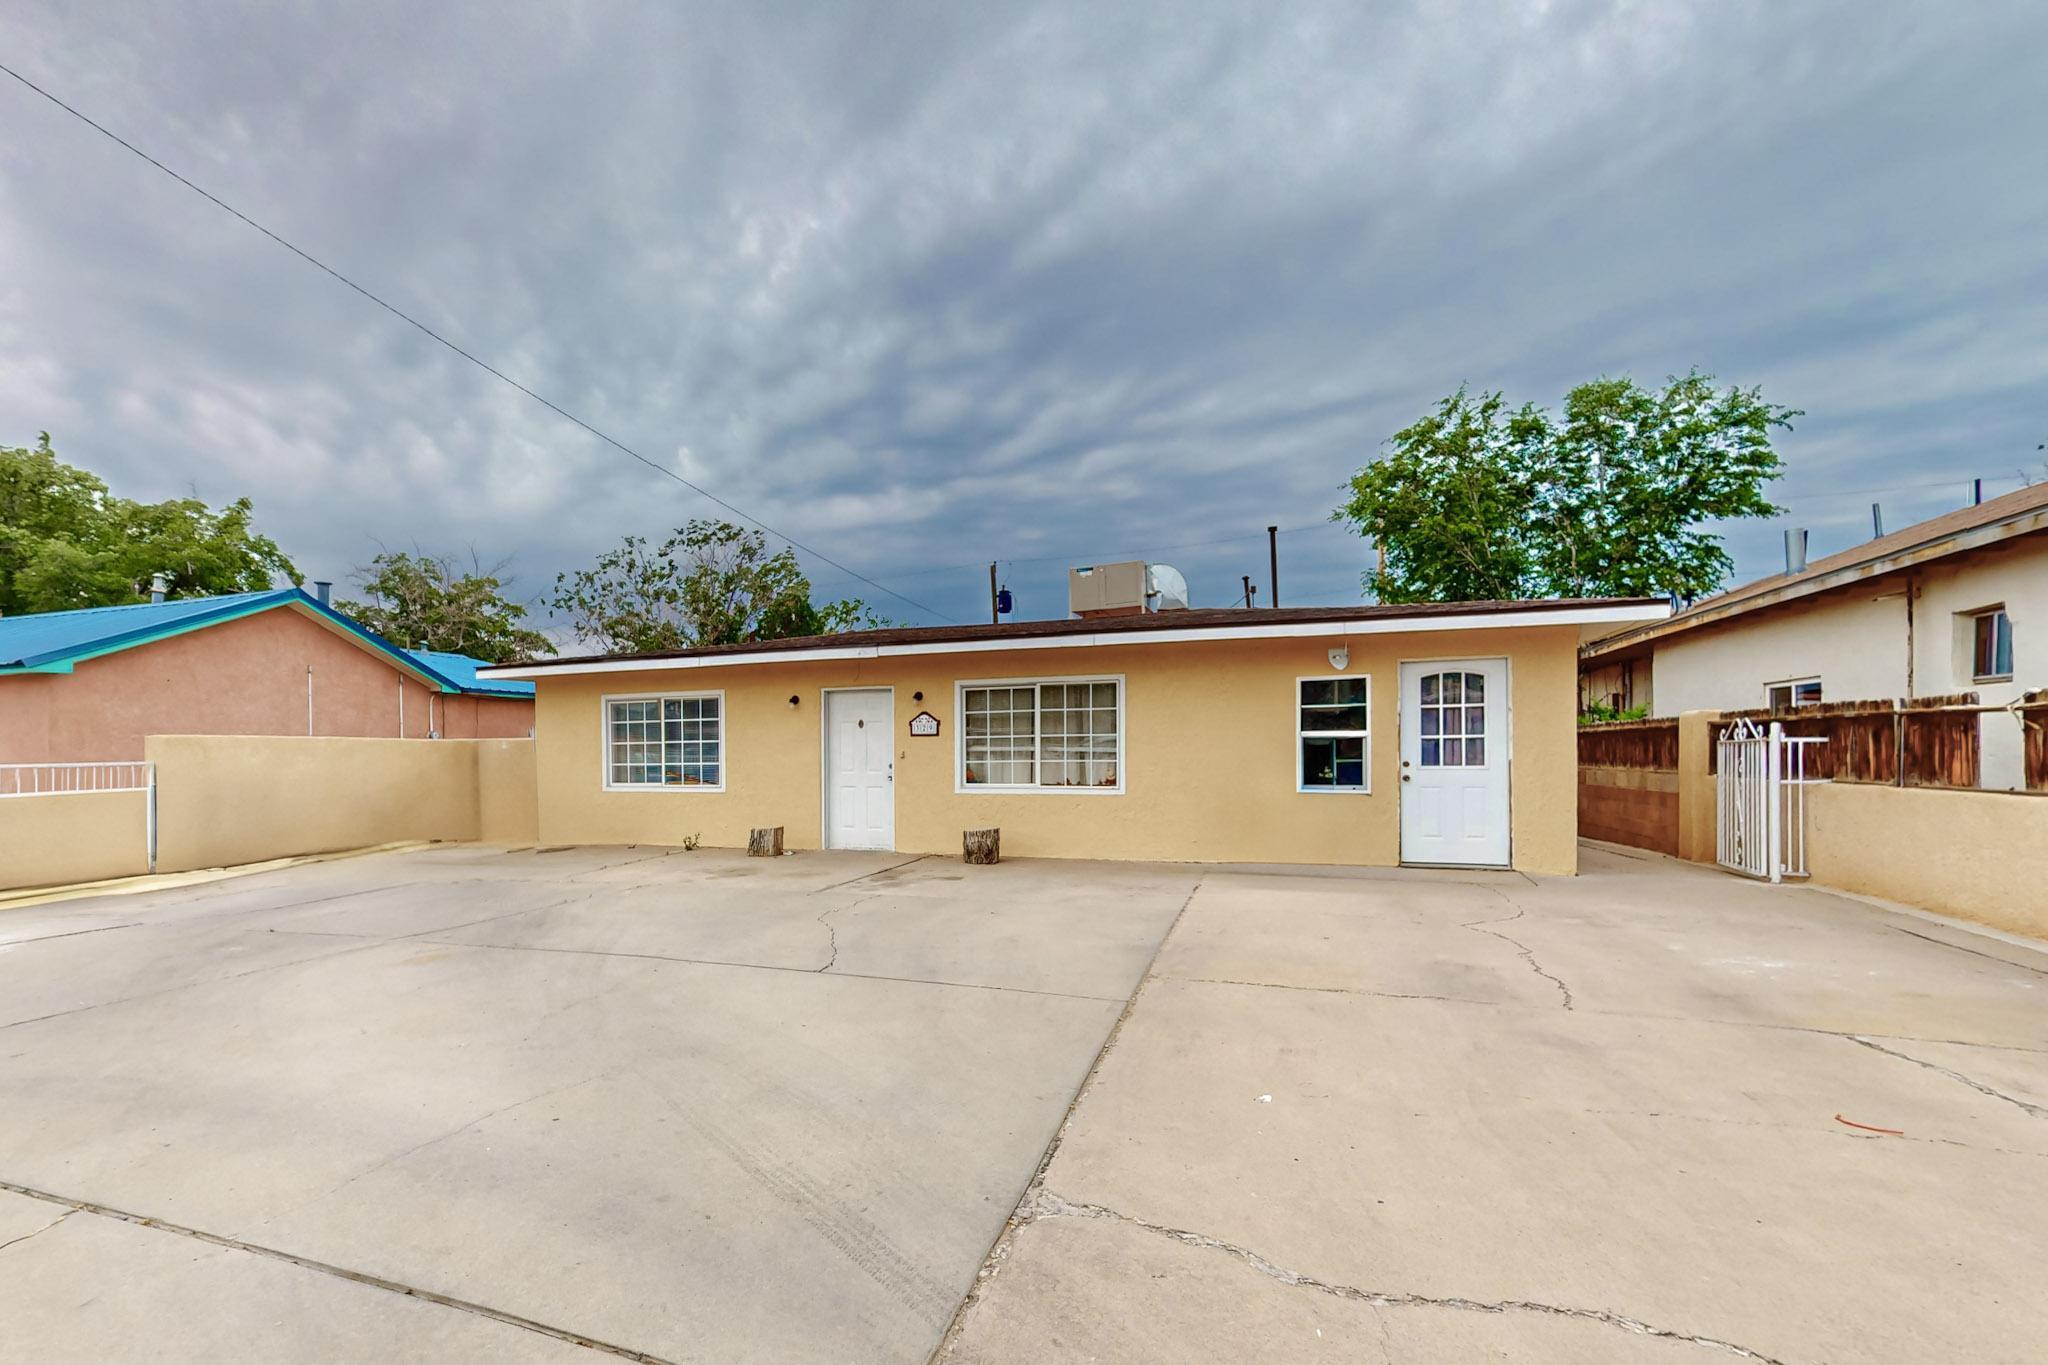 Nice Home with a full 976 sqft casita, home is walled front and back. Main house roof was replaced 3 months ago.